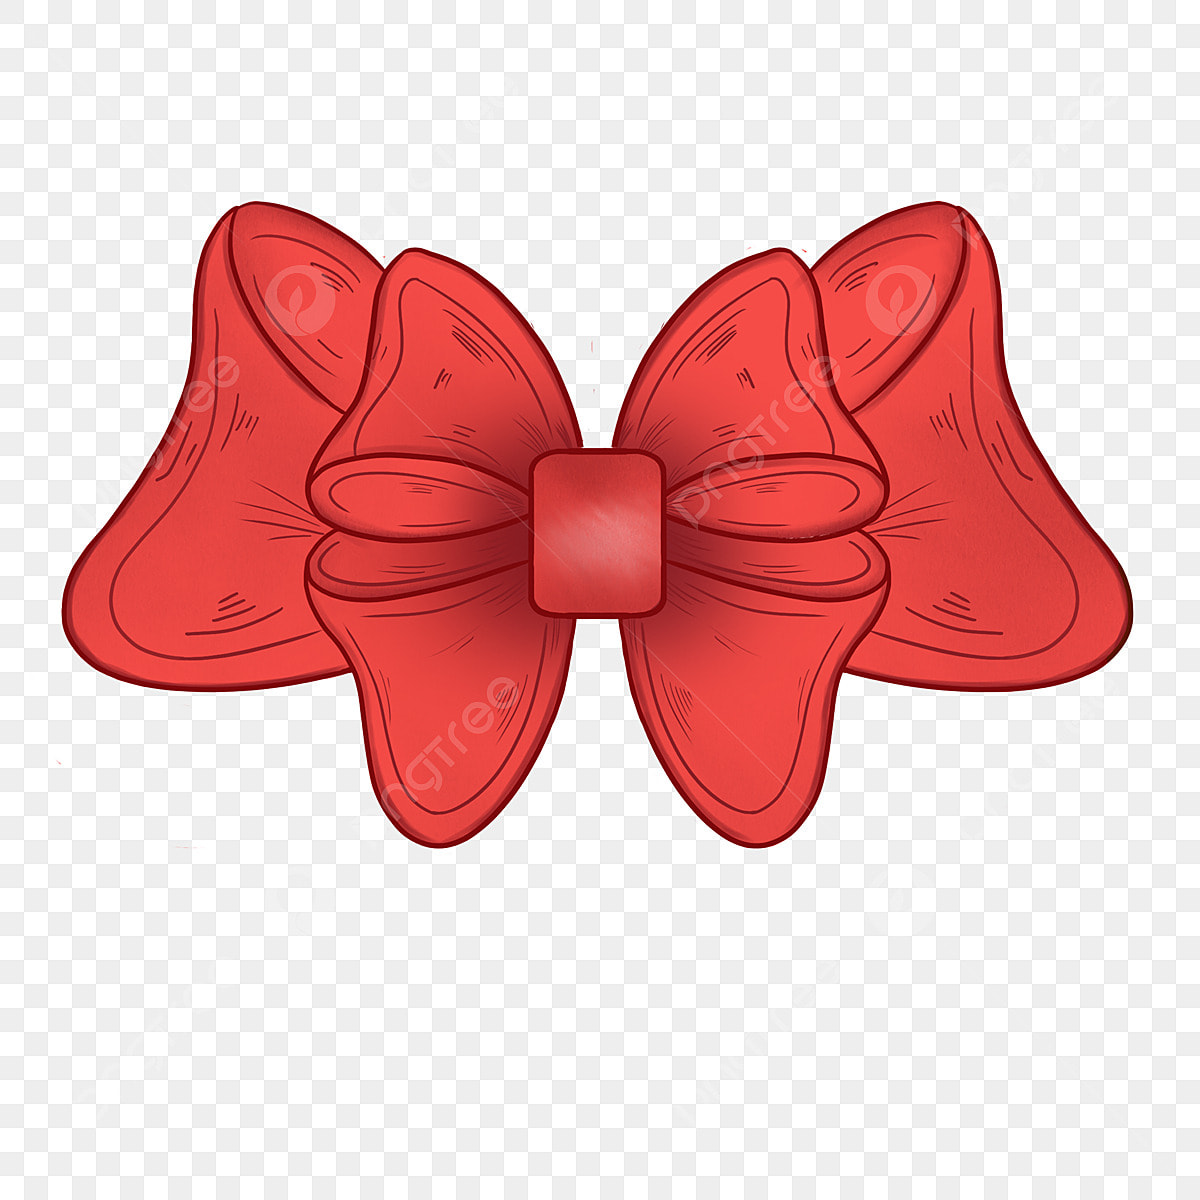 Best of Toon who wears a red hair bow